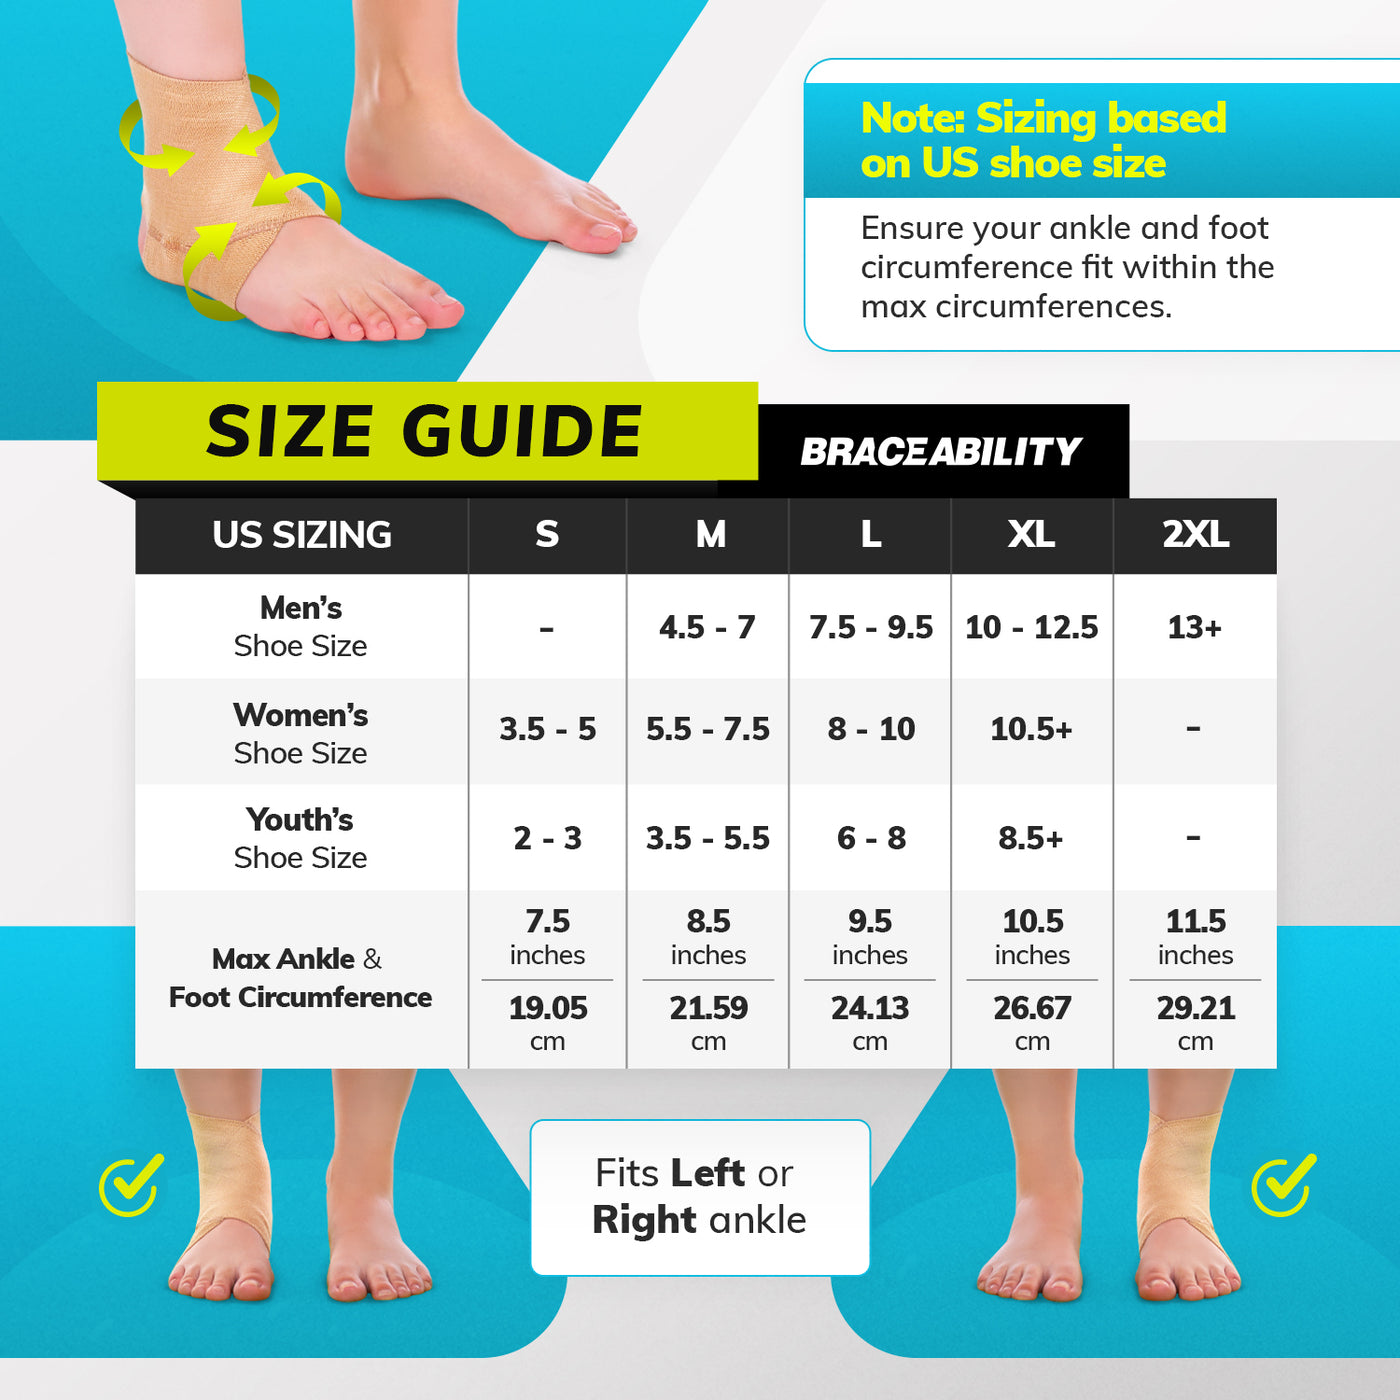 Sizing chart for the elastic foot and ankle sleeve. Available in sizes S-2XL.